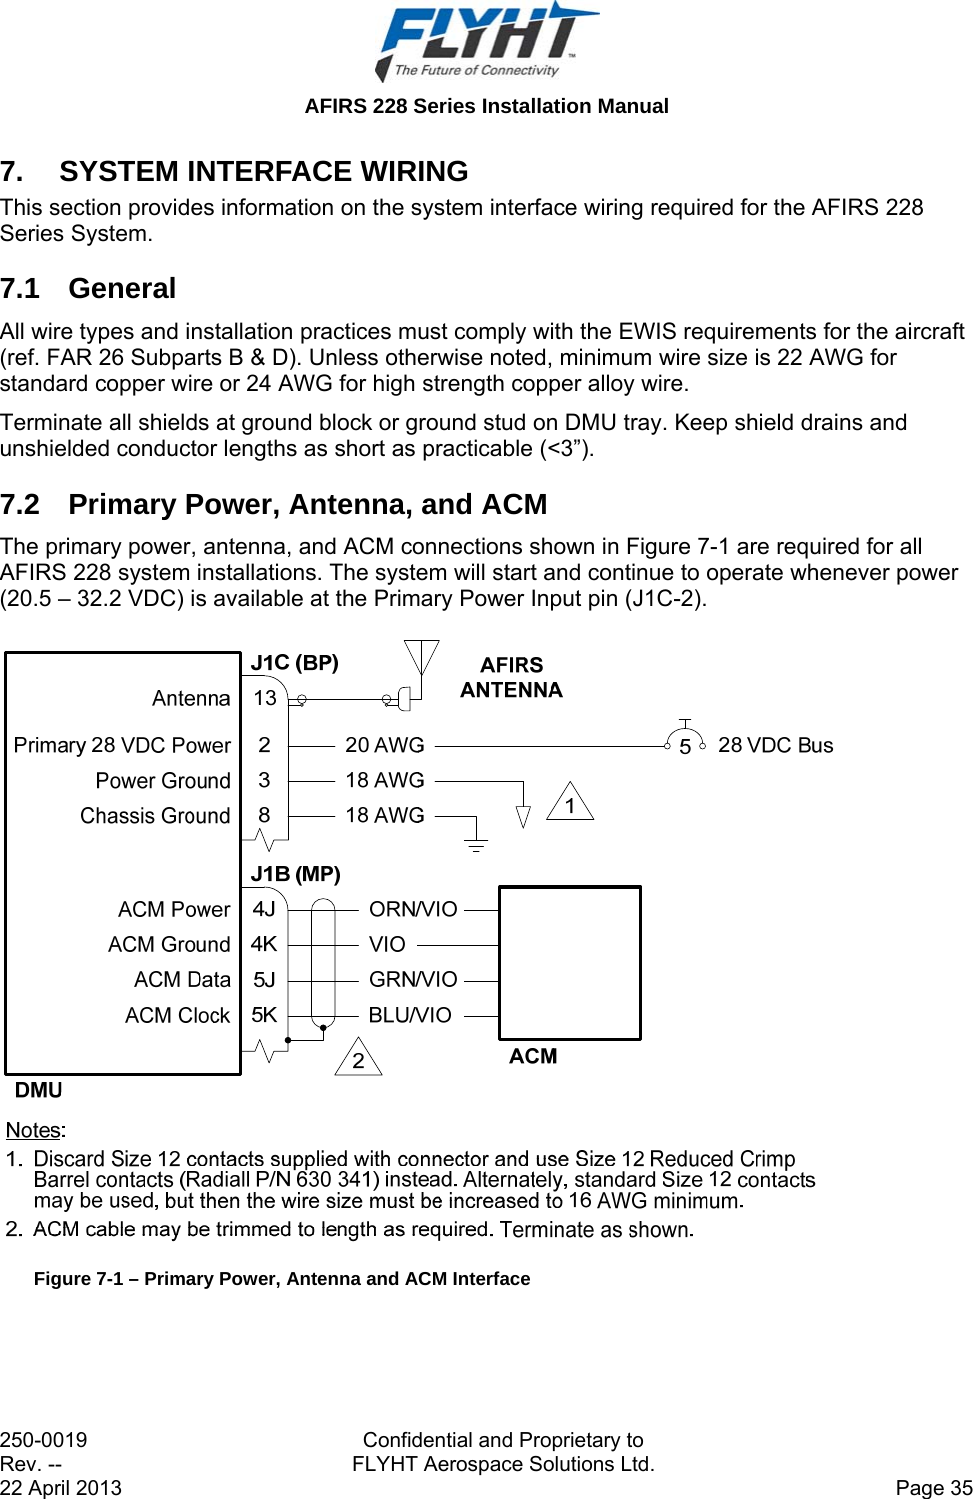  AFIRS 228 Series Installation Manual 250-0019  Confidential and Proprietary to Rev. --  FLYHT Aerospace Solutions Ltd. 22 April 2013    Page 35 7.  SYSTEM INTERFACE WIRING This section provides information on the system interface wiring required for the AFIRS 228 Series System. 7.1 General All wire types and installation practices must comply with the EWIS requirements for the aircraft (ref. FAR 26 Subparts B &amp; D). Unless otherwise noted, minimum wire size is 22 AWG for standard copper wire or 24 AWG for high strength copper alloy wire. Terminate all shields at ground block or ground stud on DMU tray. Keep shield drains and unshielded conductor lengths as short as practicable (&lt;3”). 7.2  Primary Power, Antenna, and ACM The primary power, antenna, and ACM connections shown in Figure 7-1 are required for all AFIRS 228 system installations. The system will start and continue to operate whenever power (20.5 – 32.2 VDC) is available at the Primary Power Input pin (J1C-2).   Figure 7-1 – Primary Power, Antenna and ACM Interface  